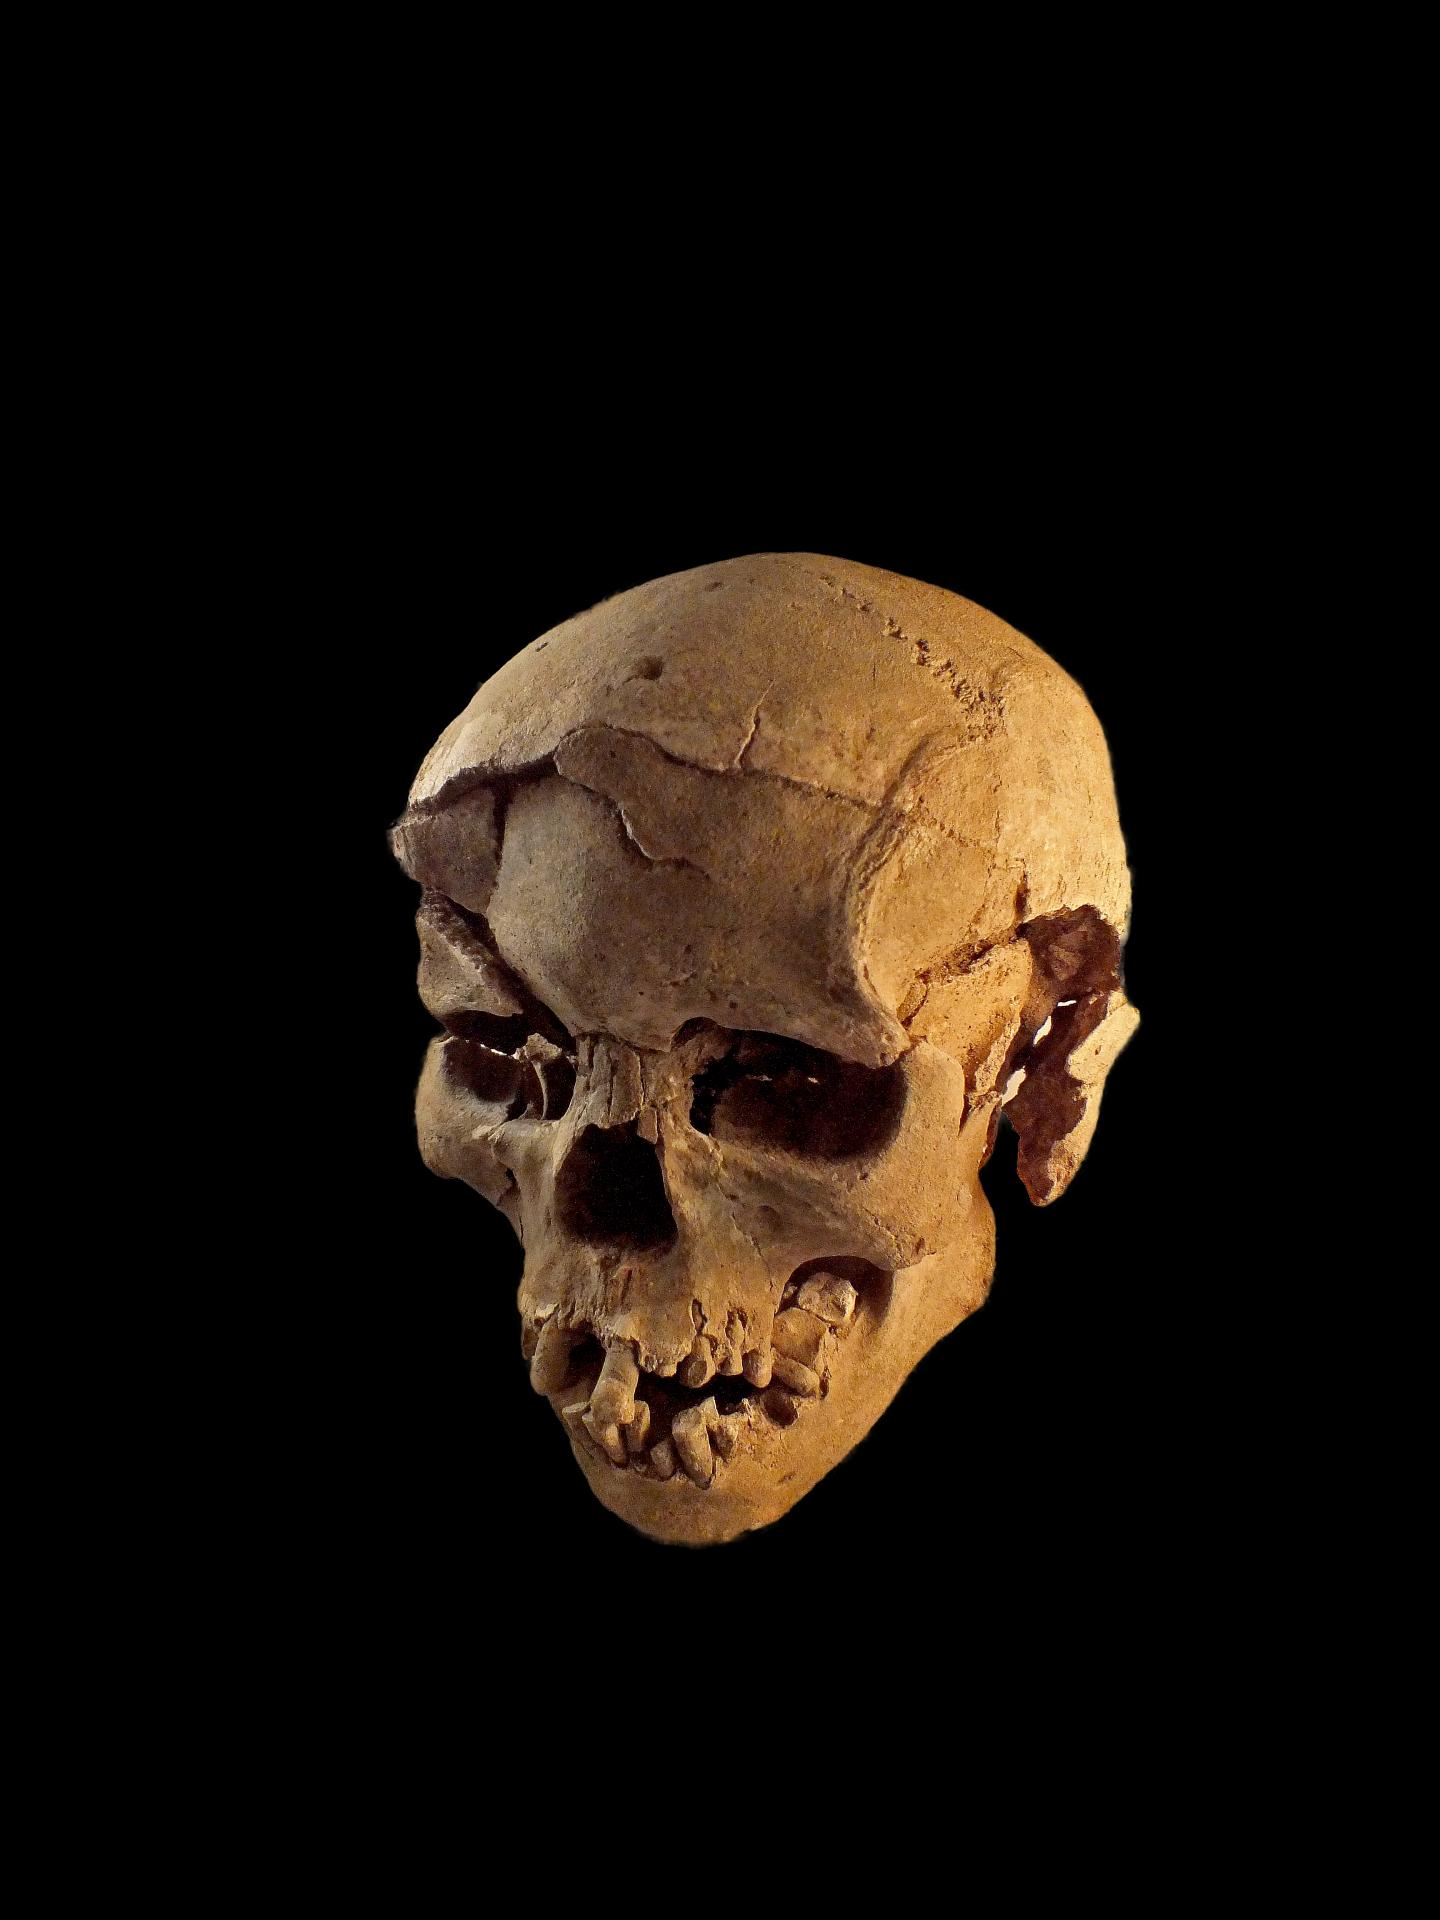 Skull of Adult Male Hunter-Gatherer Who Suffered Severe Blows to the Head